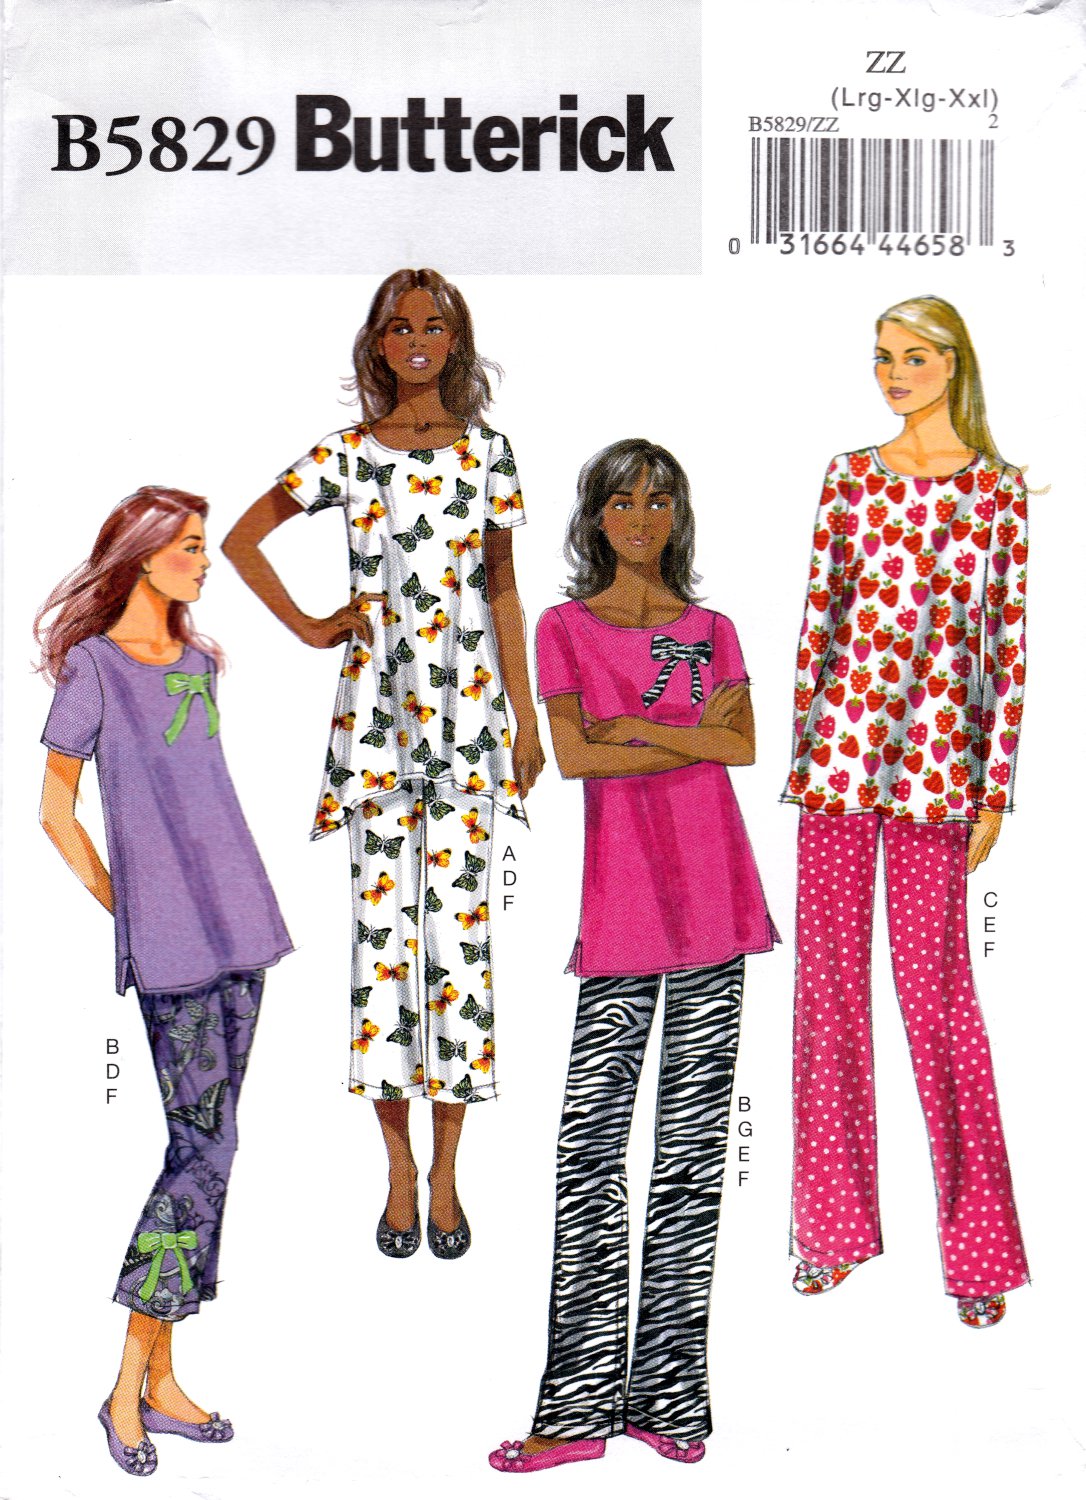 Butterick B5829 Misses Pullover Top Pants Slippers Bow Loose Fit Sewing Pattern sizes Lrg-Xlg-Xxl